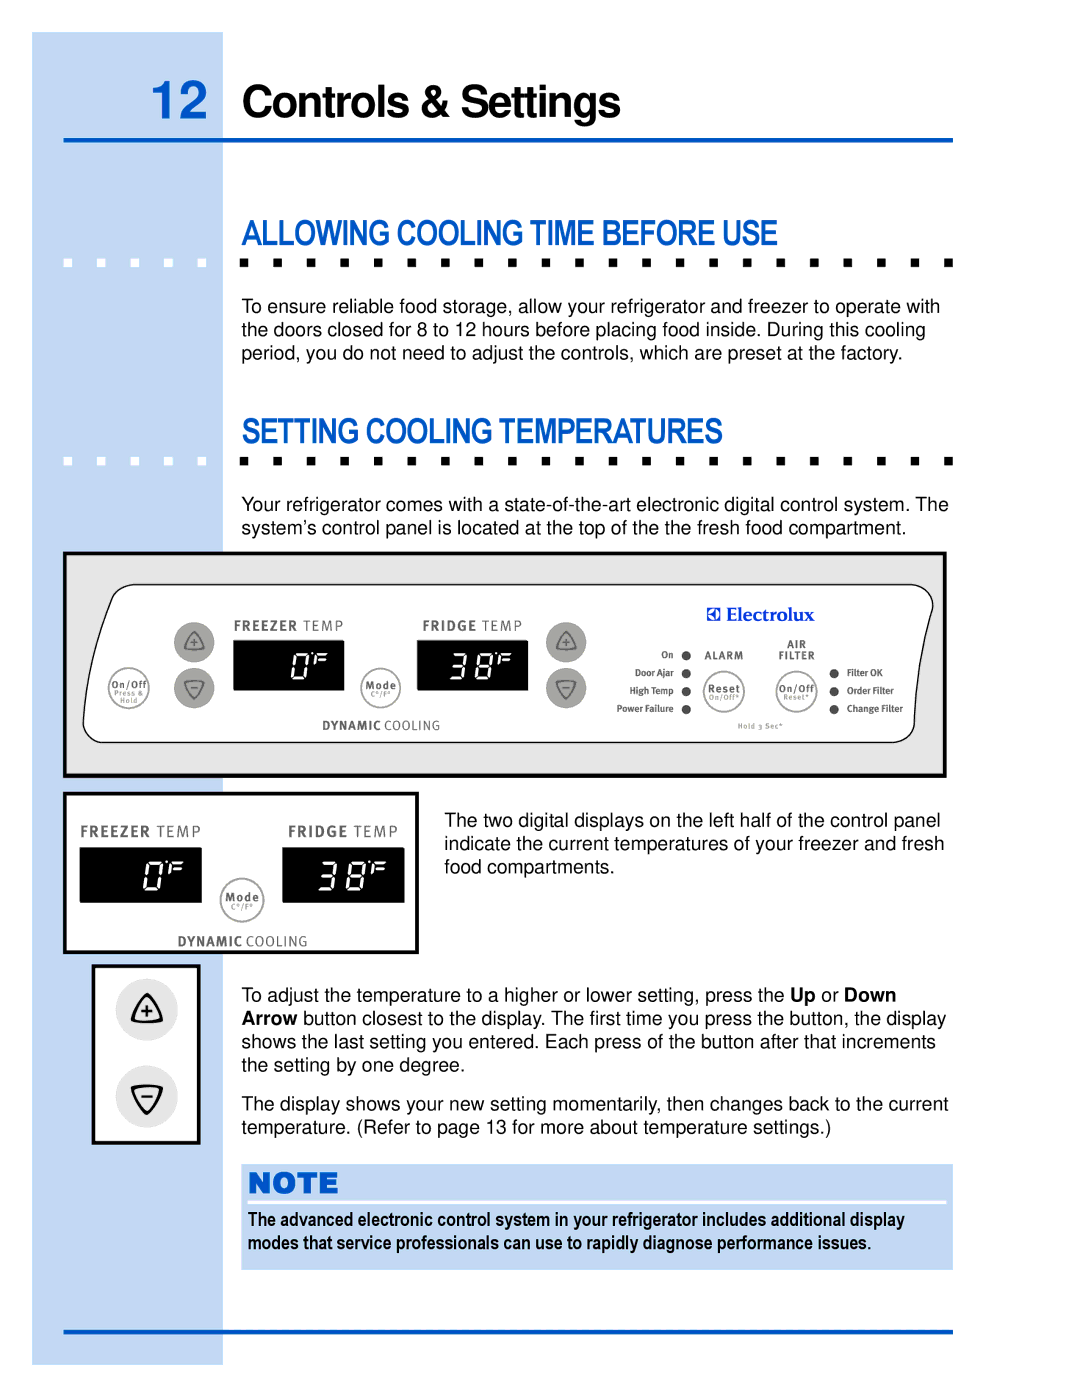 Electrolux E23CS78HPS manual Controls & Settings, Allowing Cooling Time Before USE, Setting Cooling Temperatures 